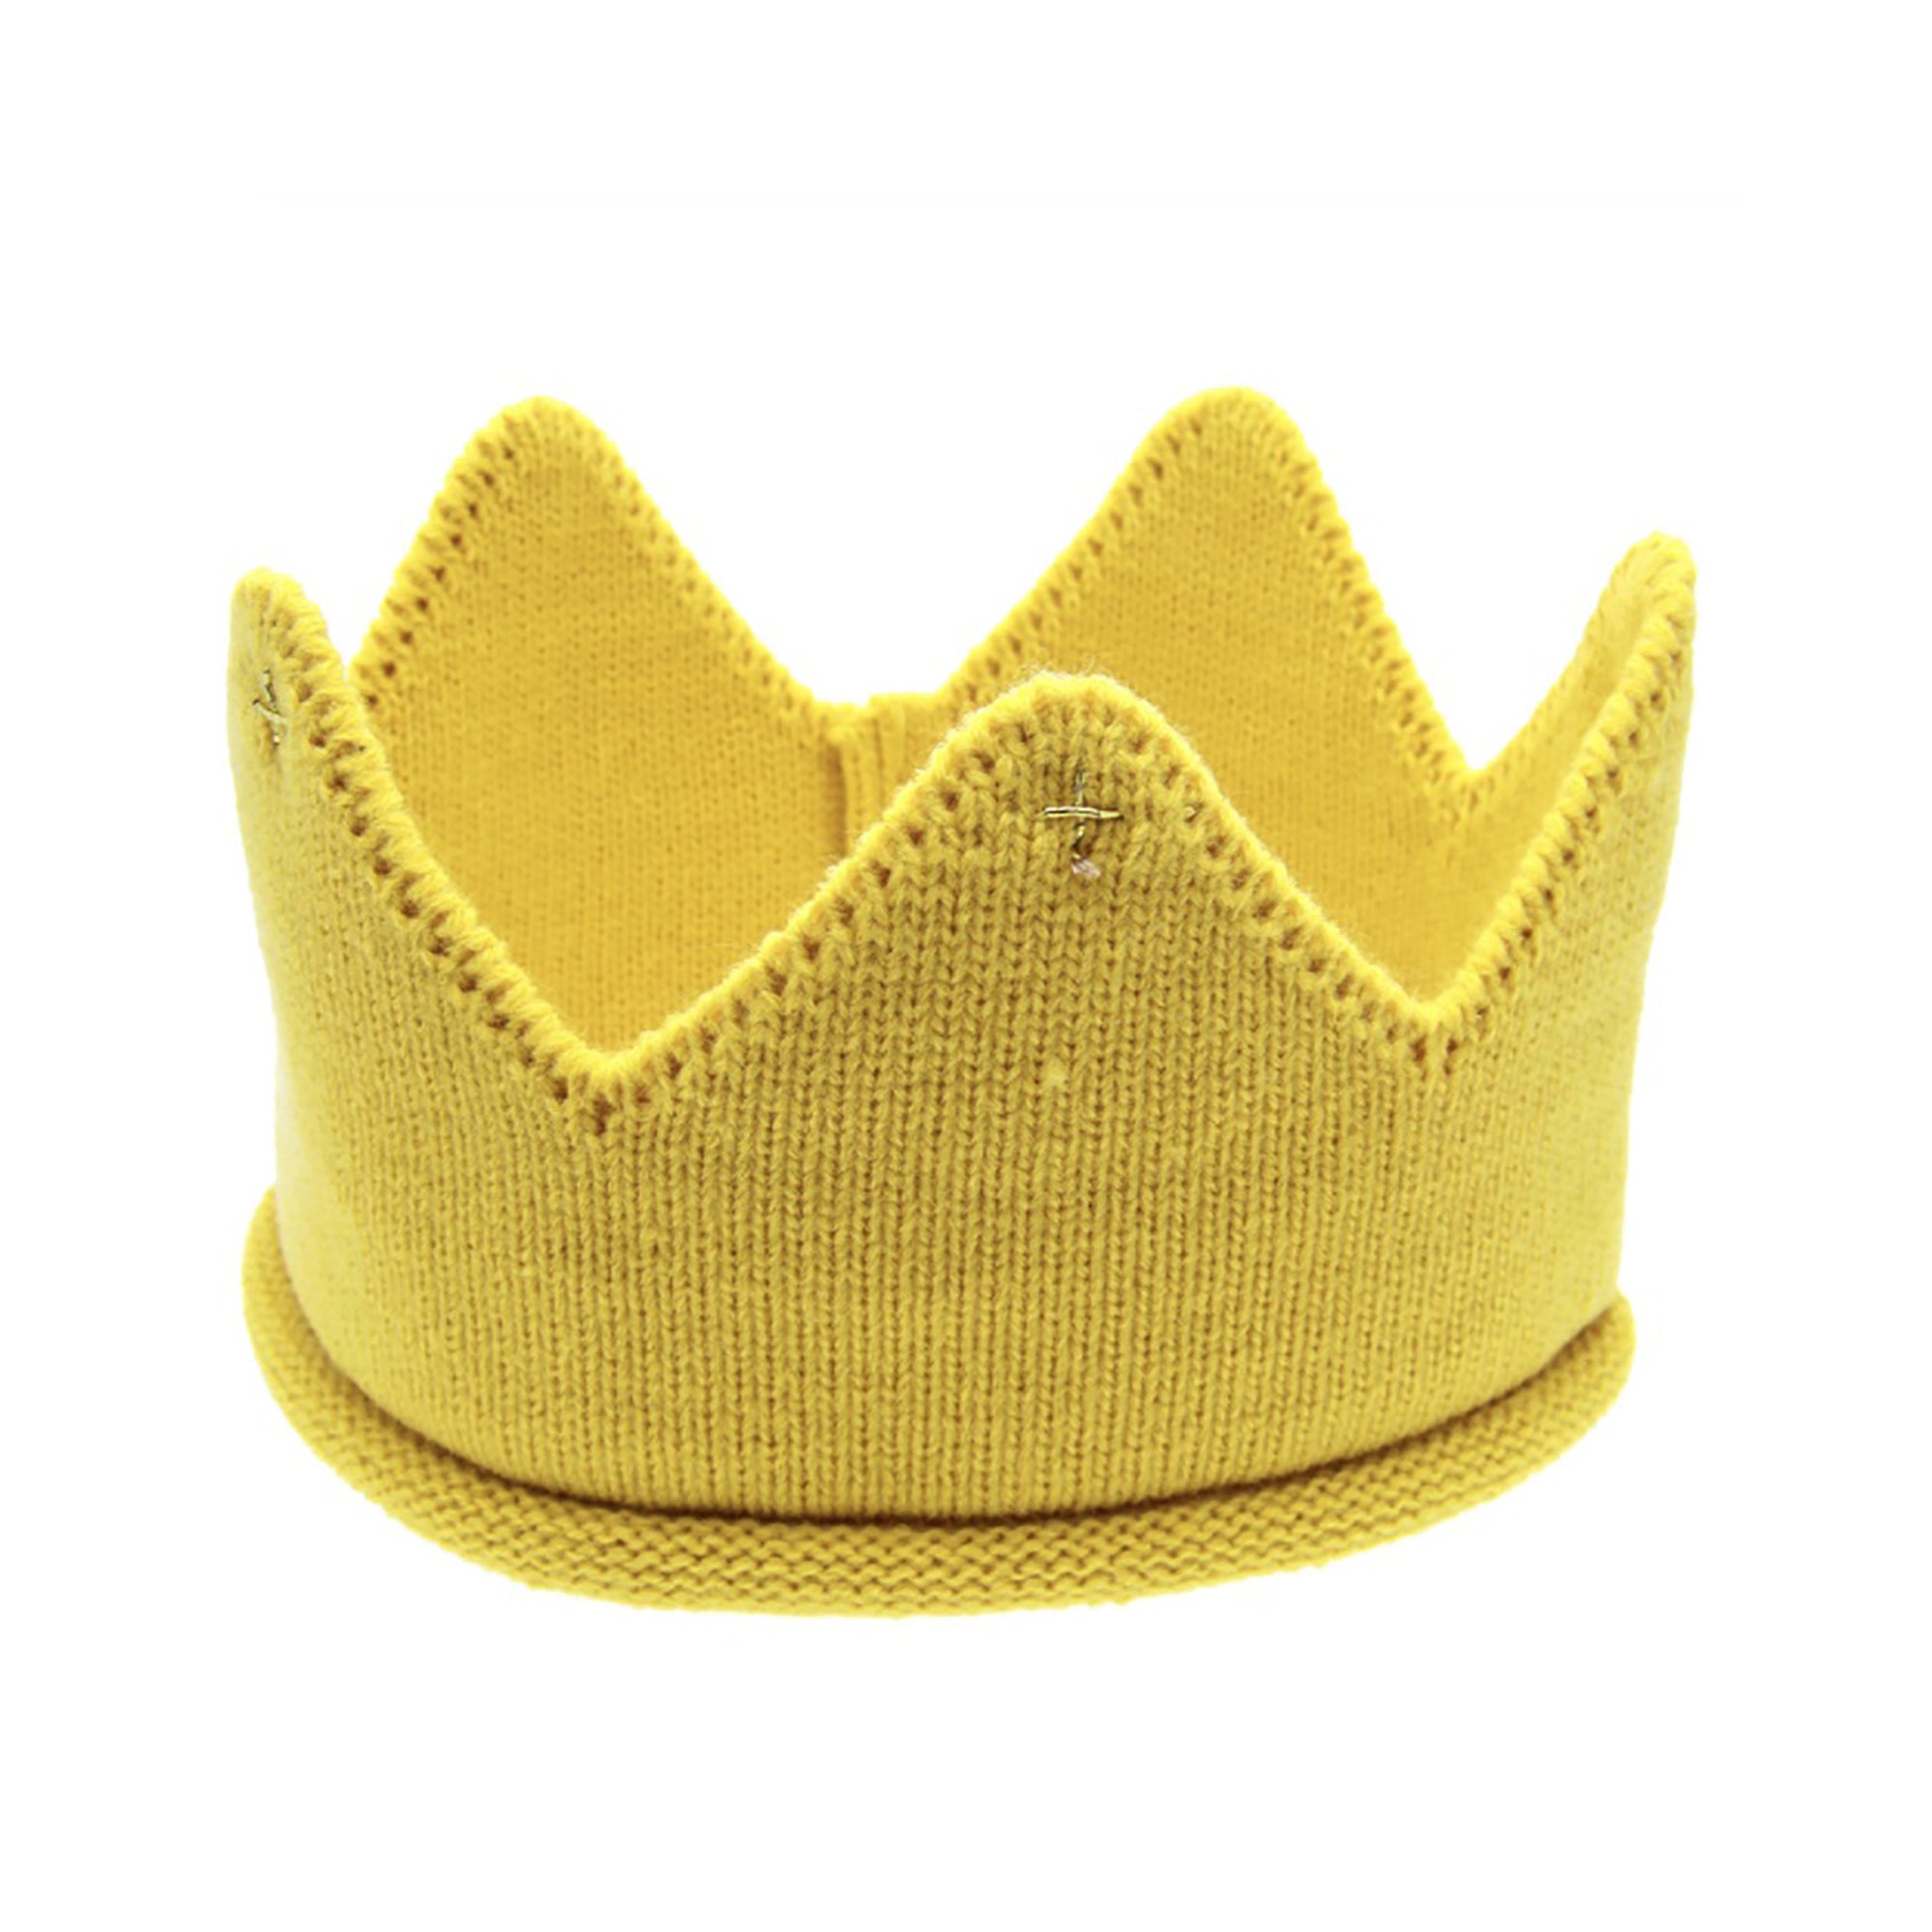 Yellow Baby Crown, Knit cotton/wool blend, yellow